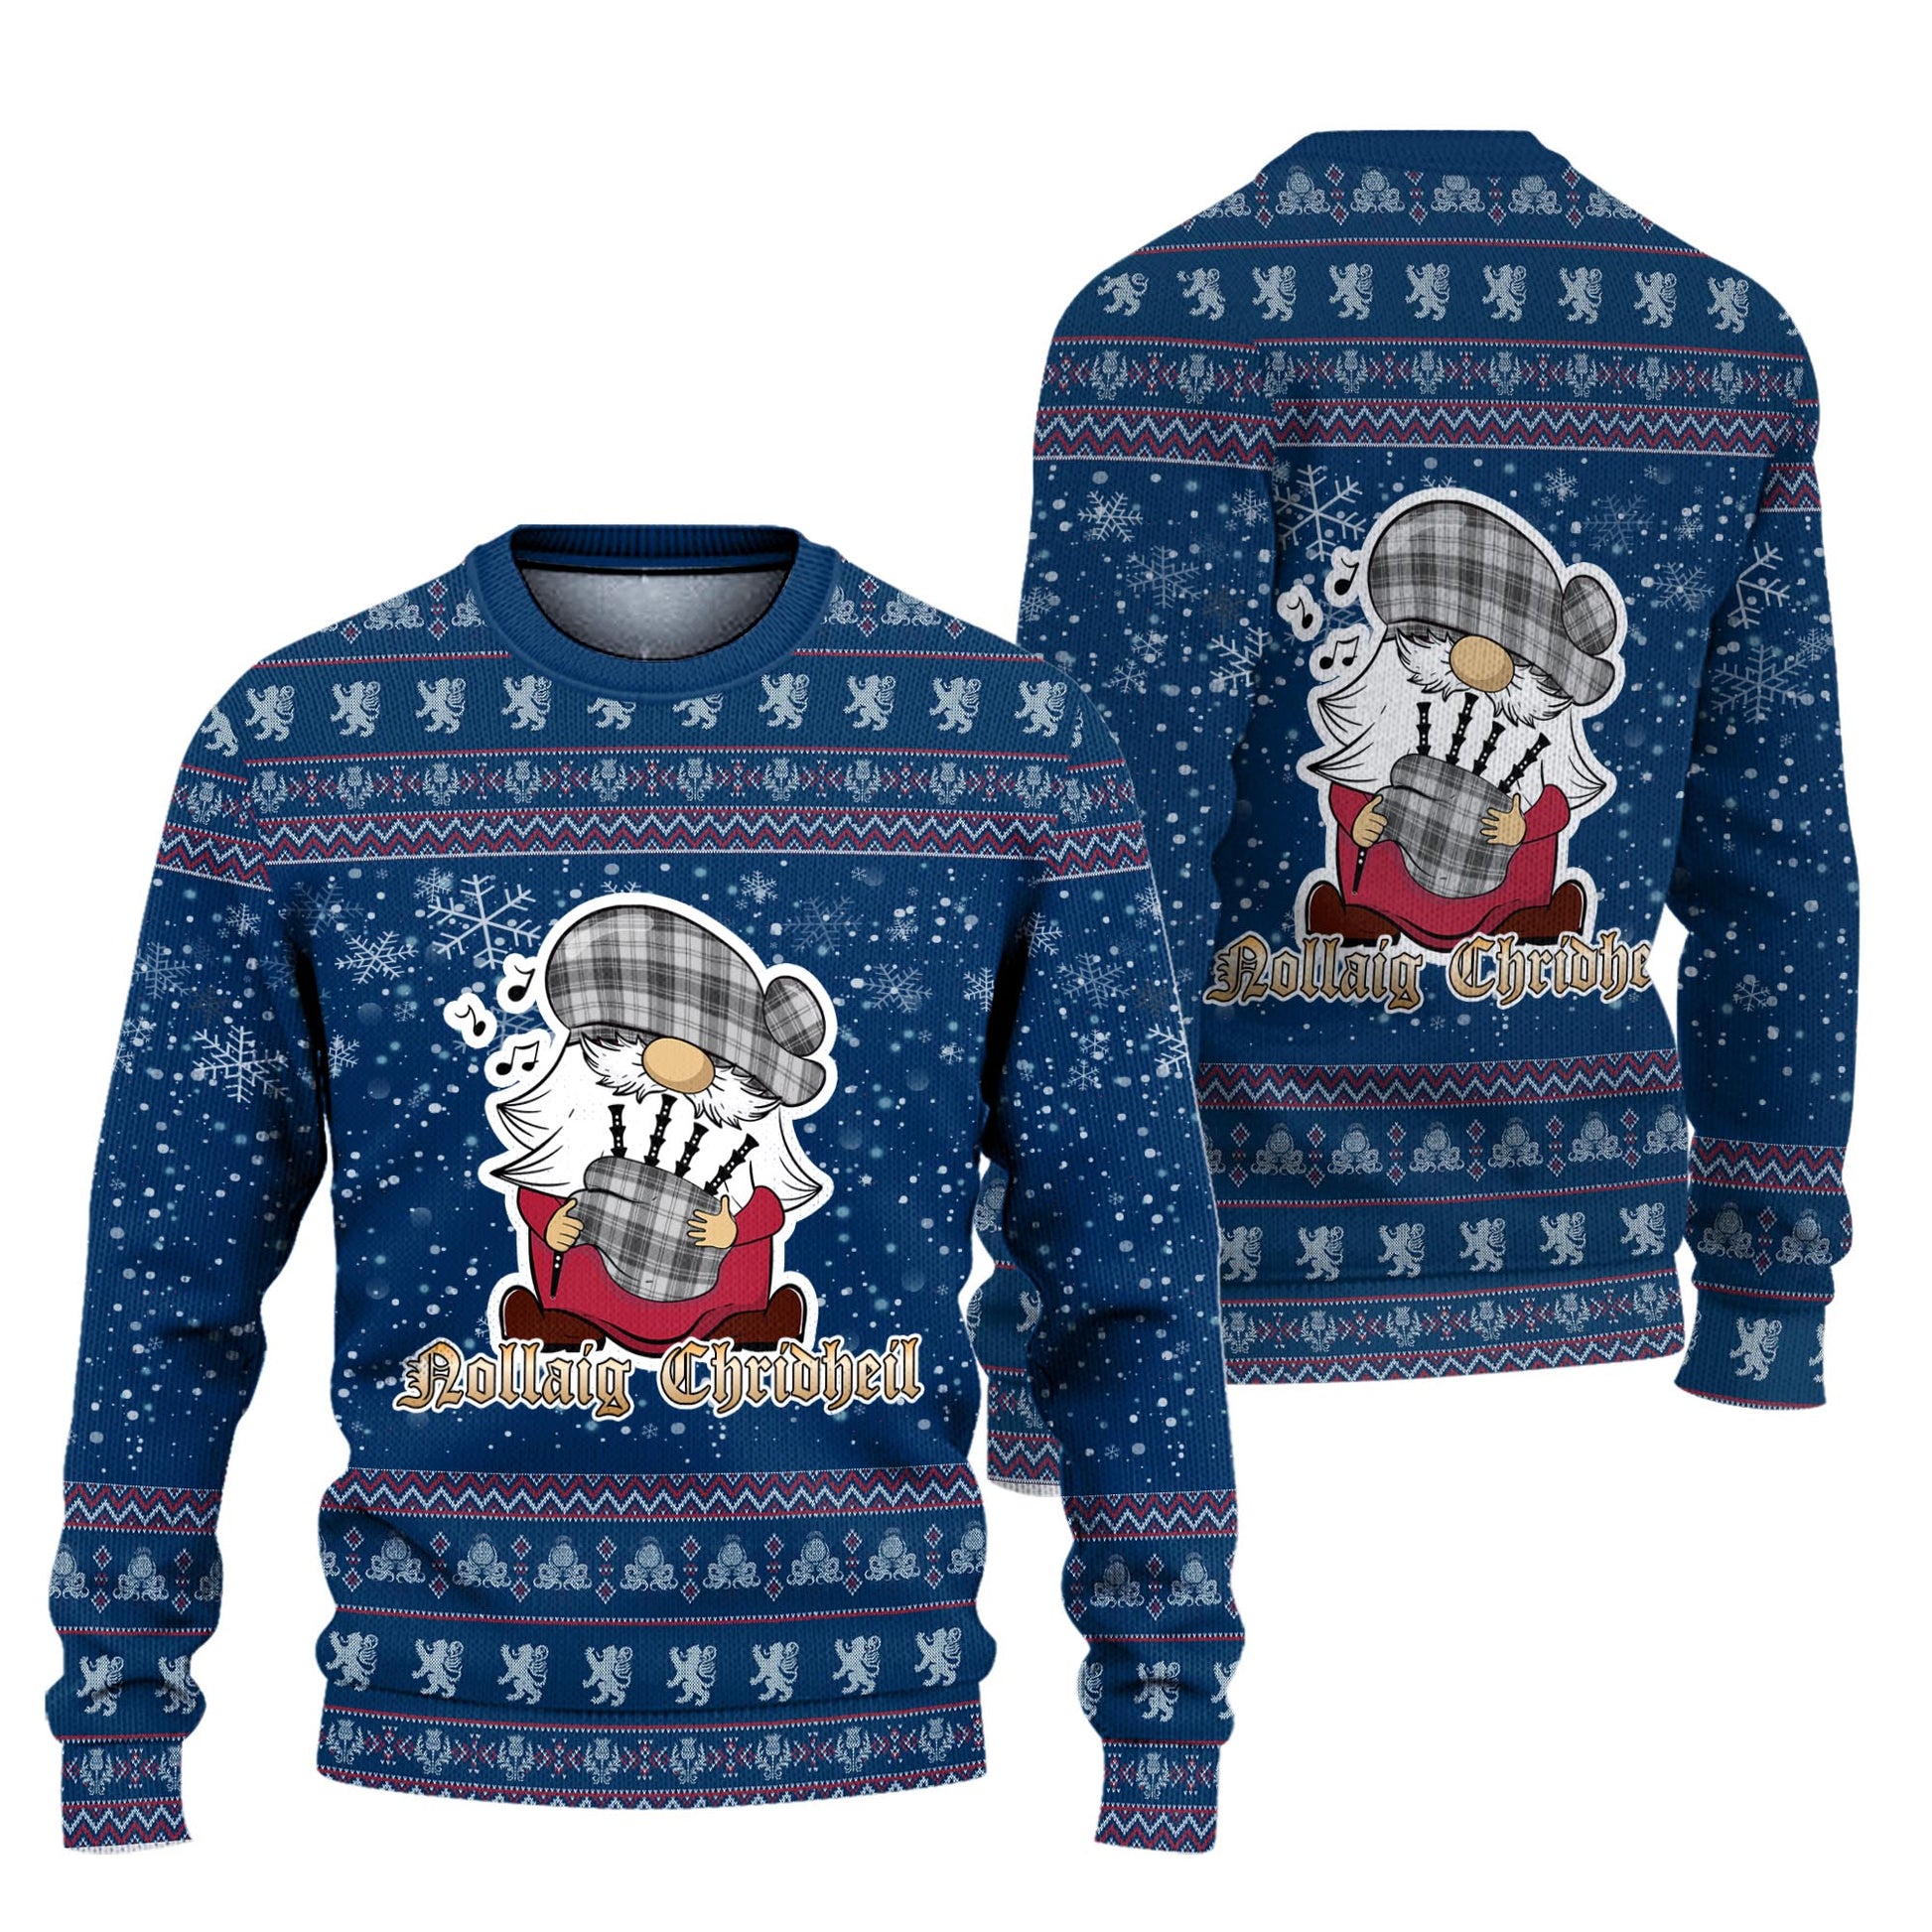 Glen Clan Christmas Family Knitted Sweater with Funny Gnome Playing Bagpipes Unisex Blue - Tartanvibesclothing